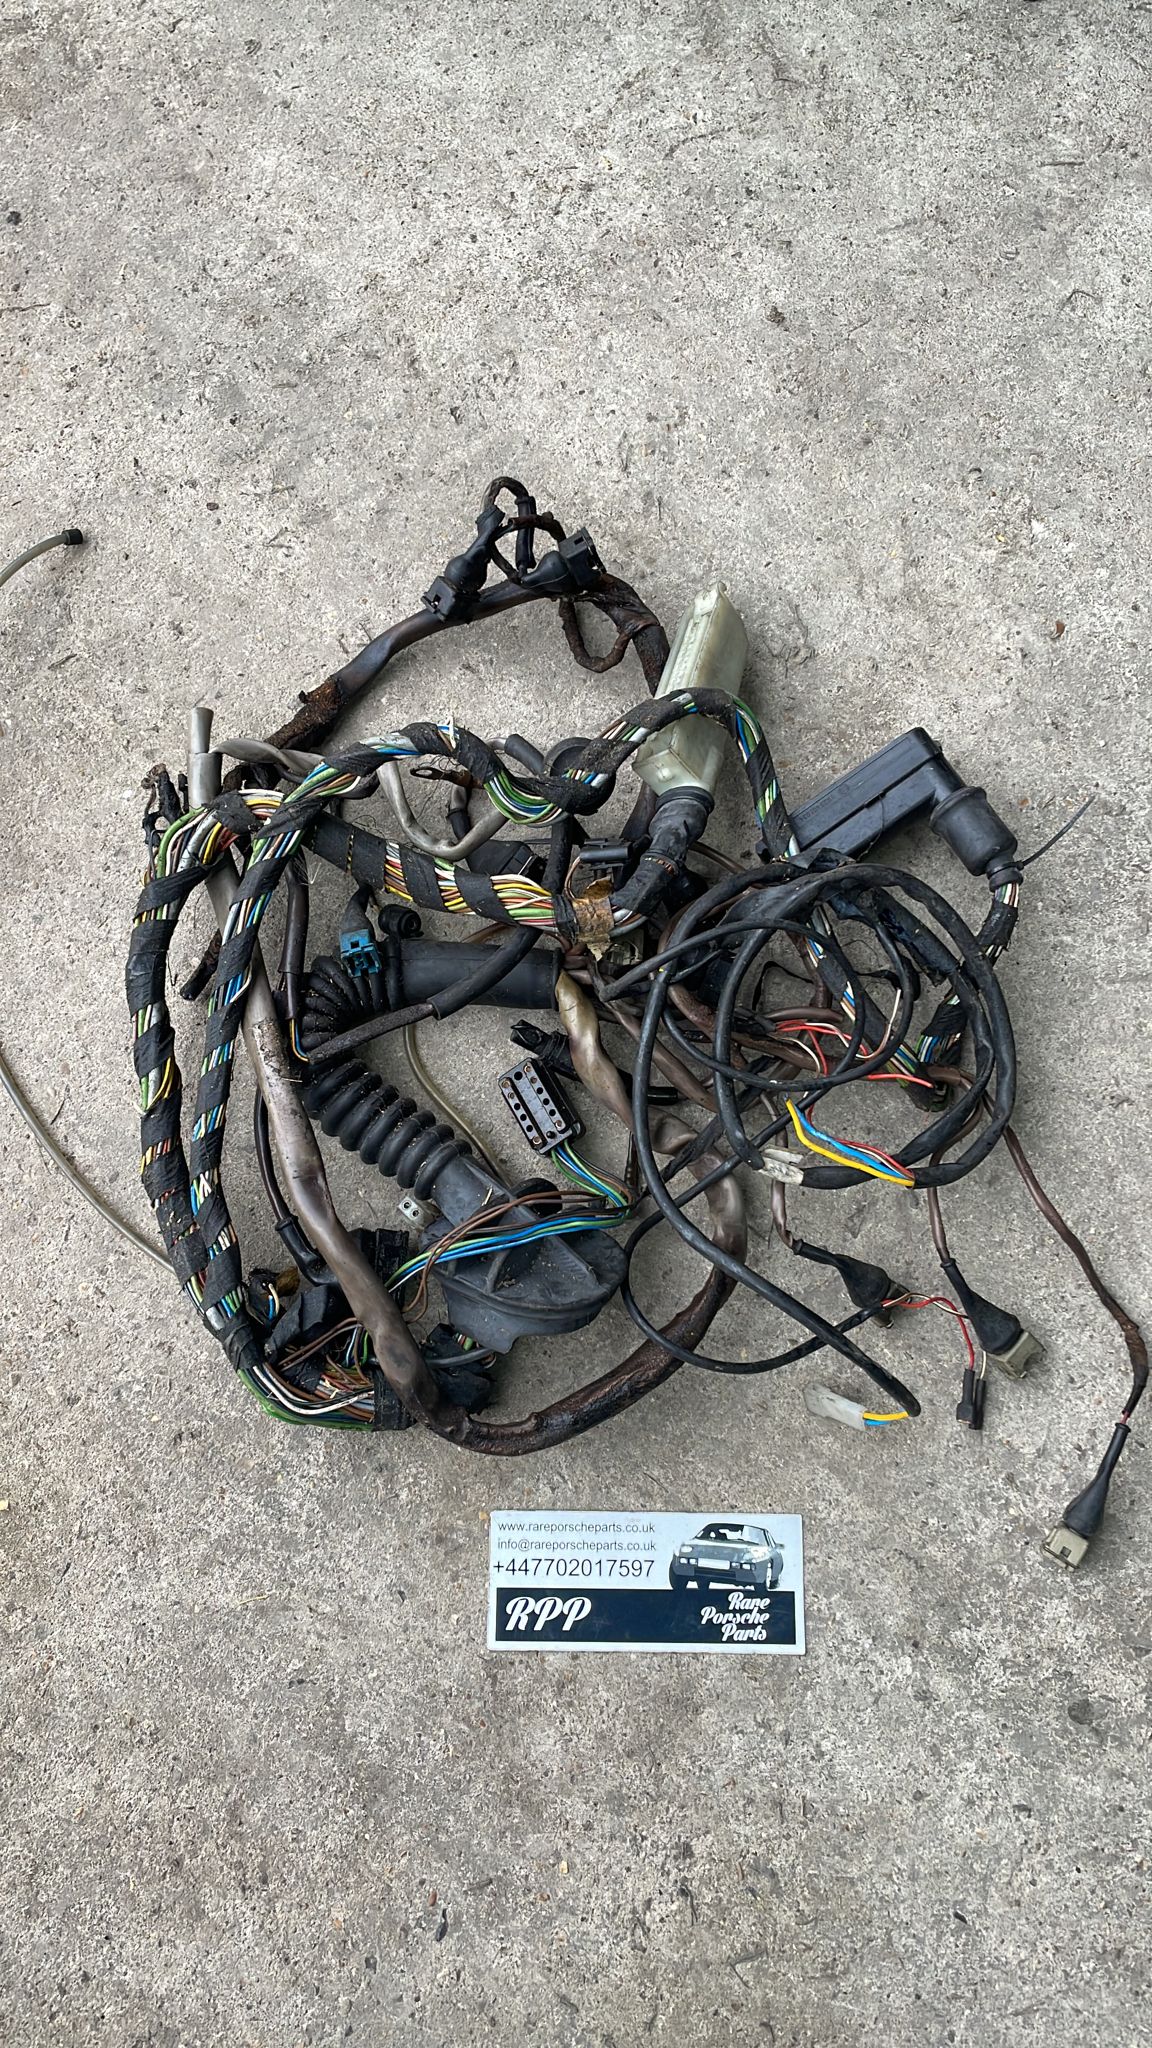 Porsche 944 Turbo Engine wiring loom, used, spares or repair 014